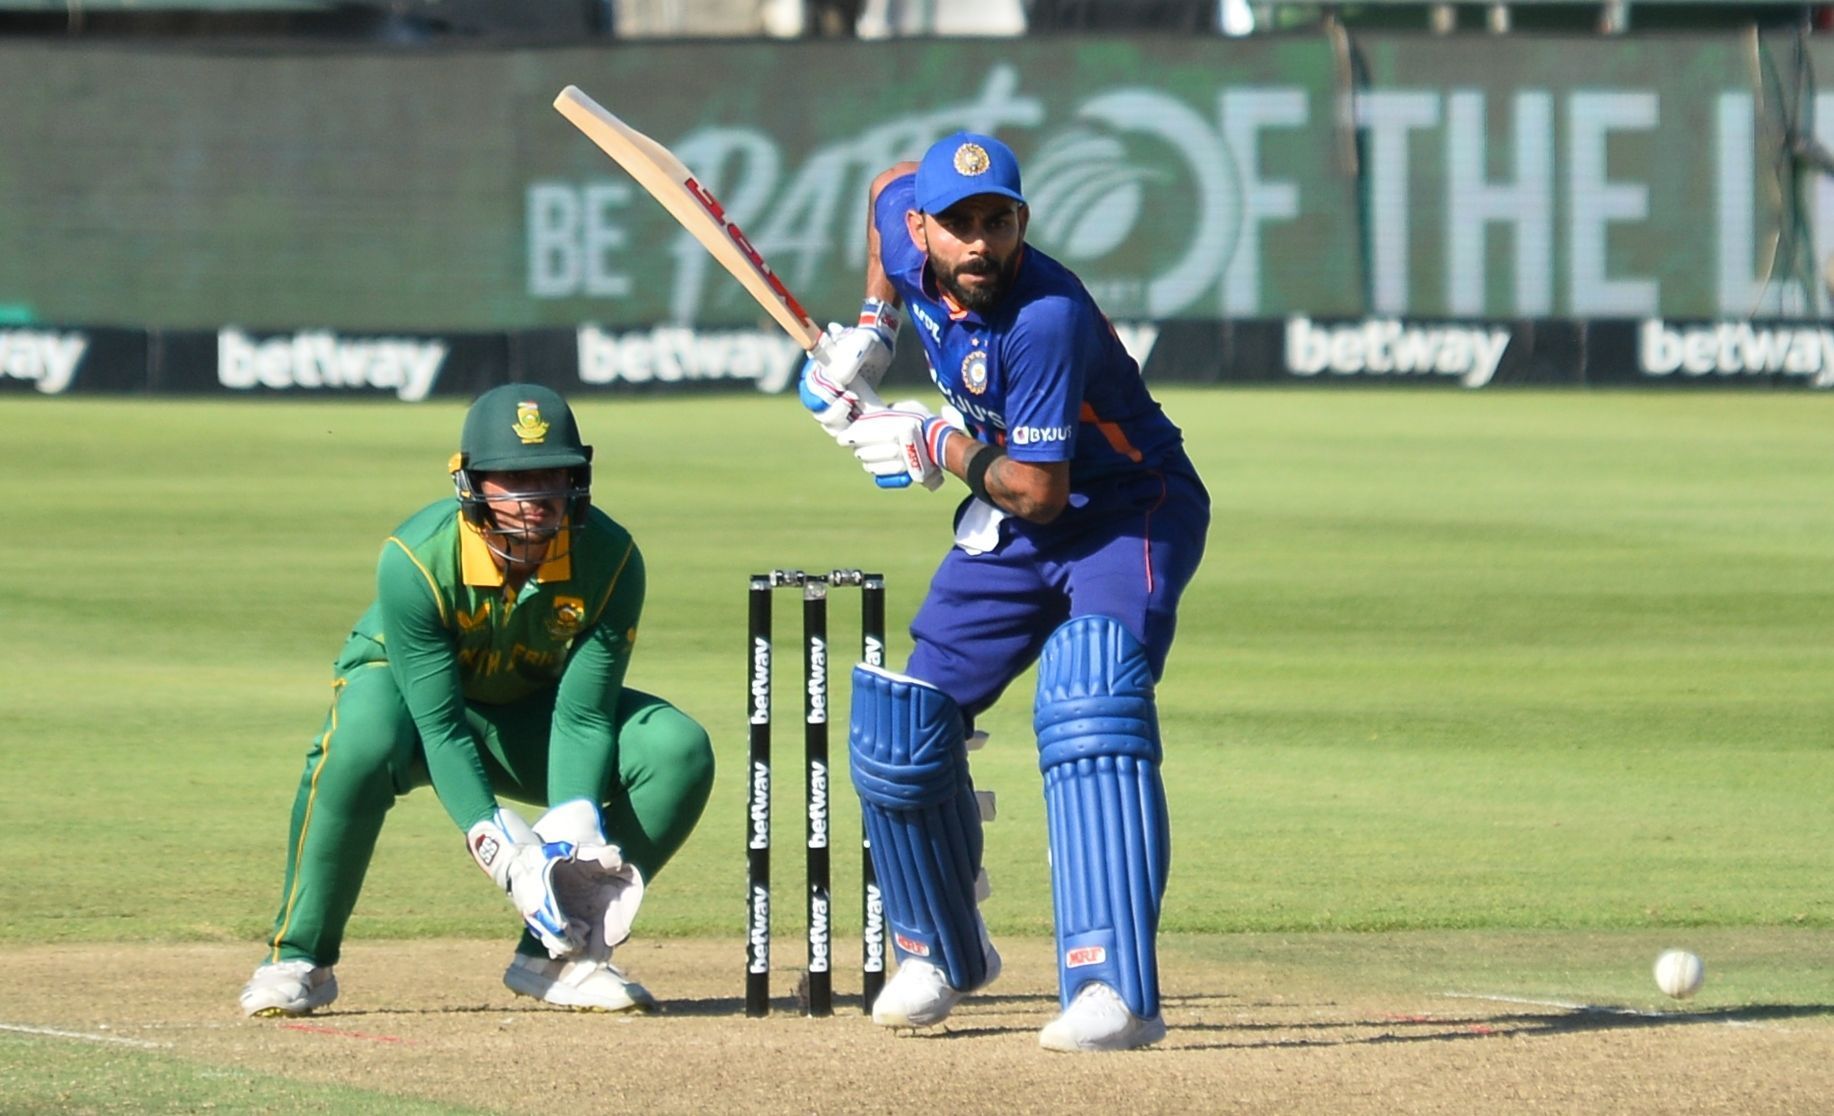 Virat Kohli scored a couple of half-centuries in the ODI series against South Africa.